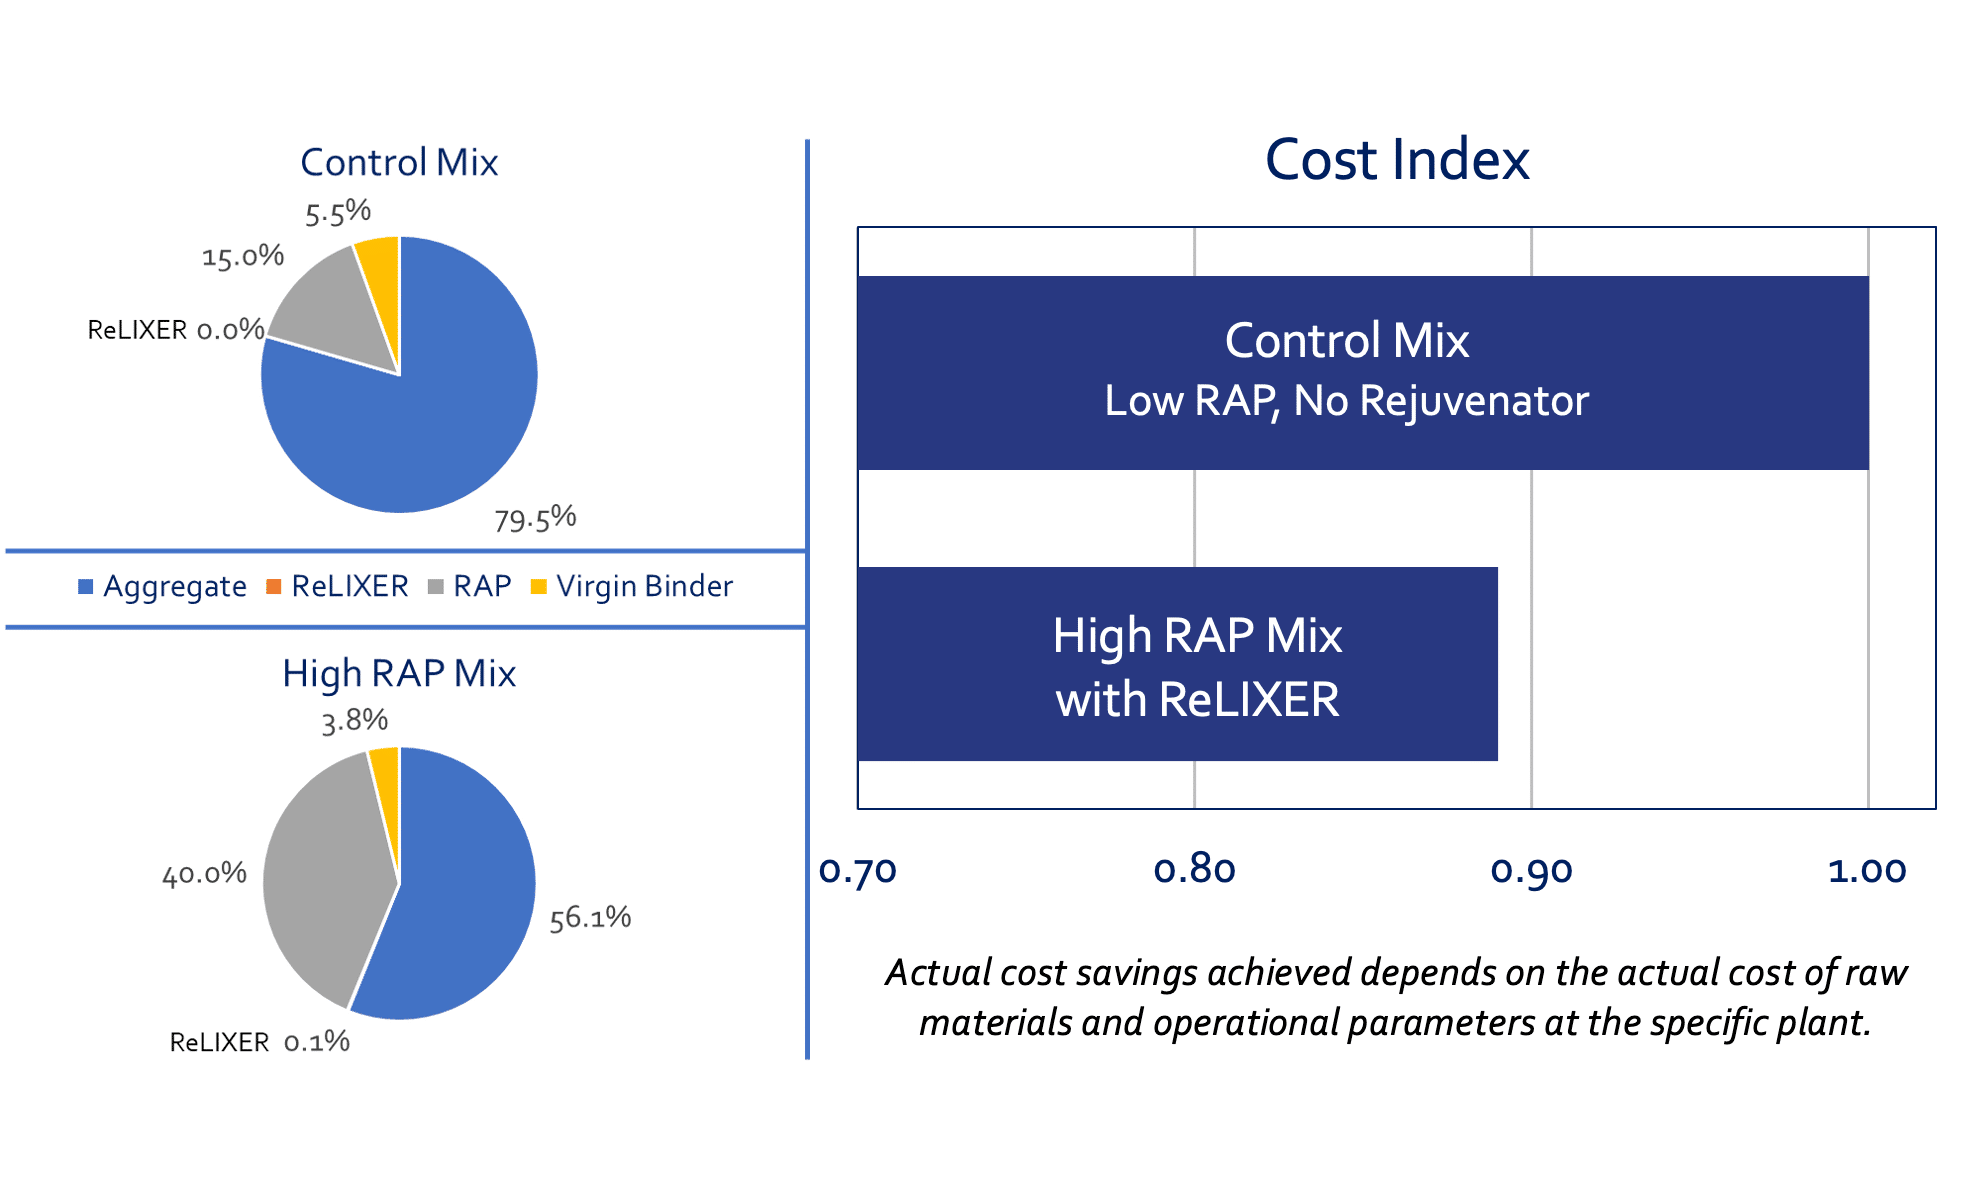 ReLIXER Reduces Cost